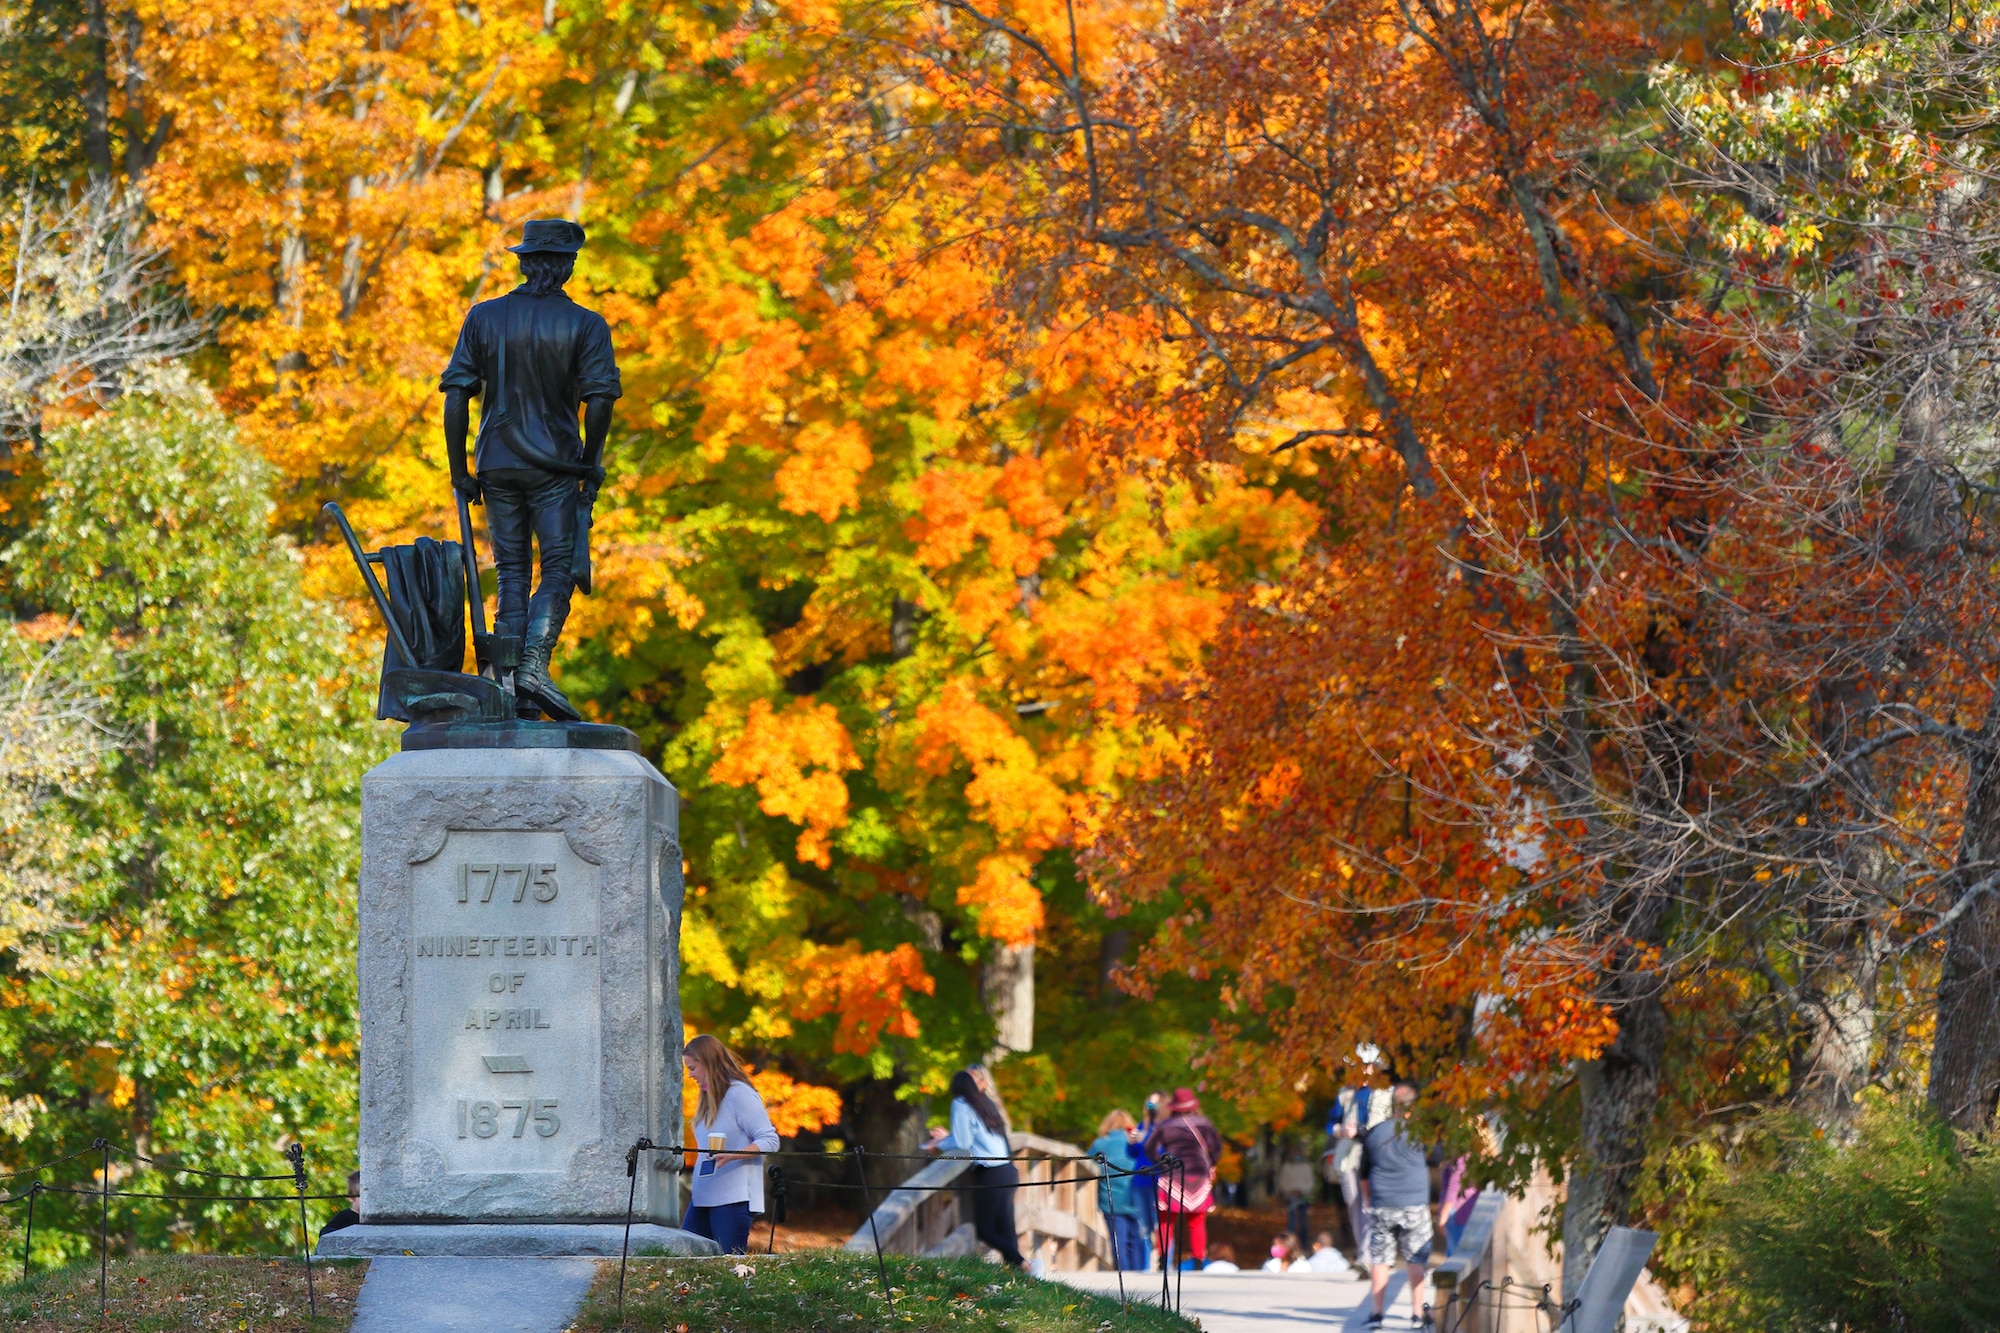 Concord,,Massachusetts,-,October,18,,2020:,The,Minute,Man,Statue